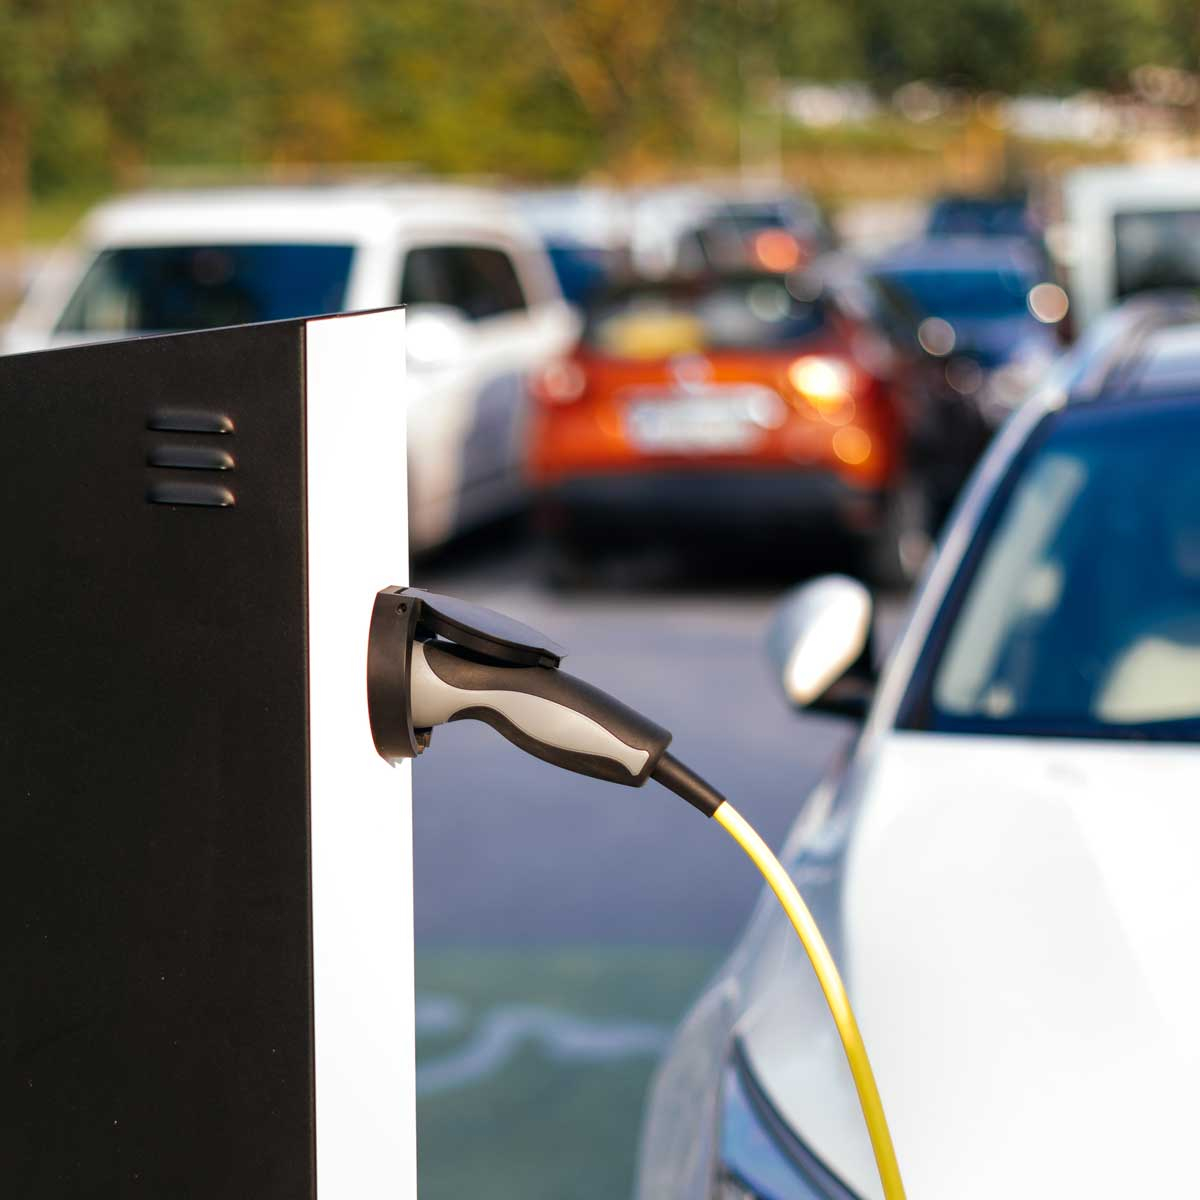 EV charging service introduced by Digital Charging Solutions